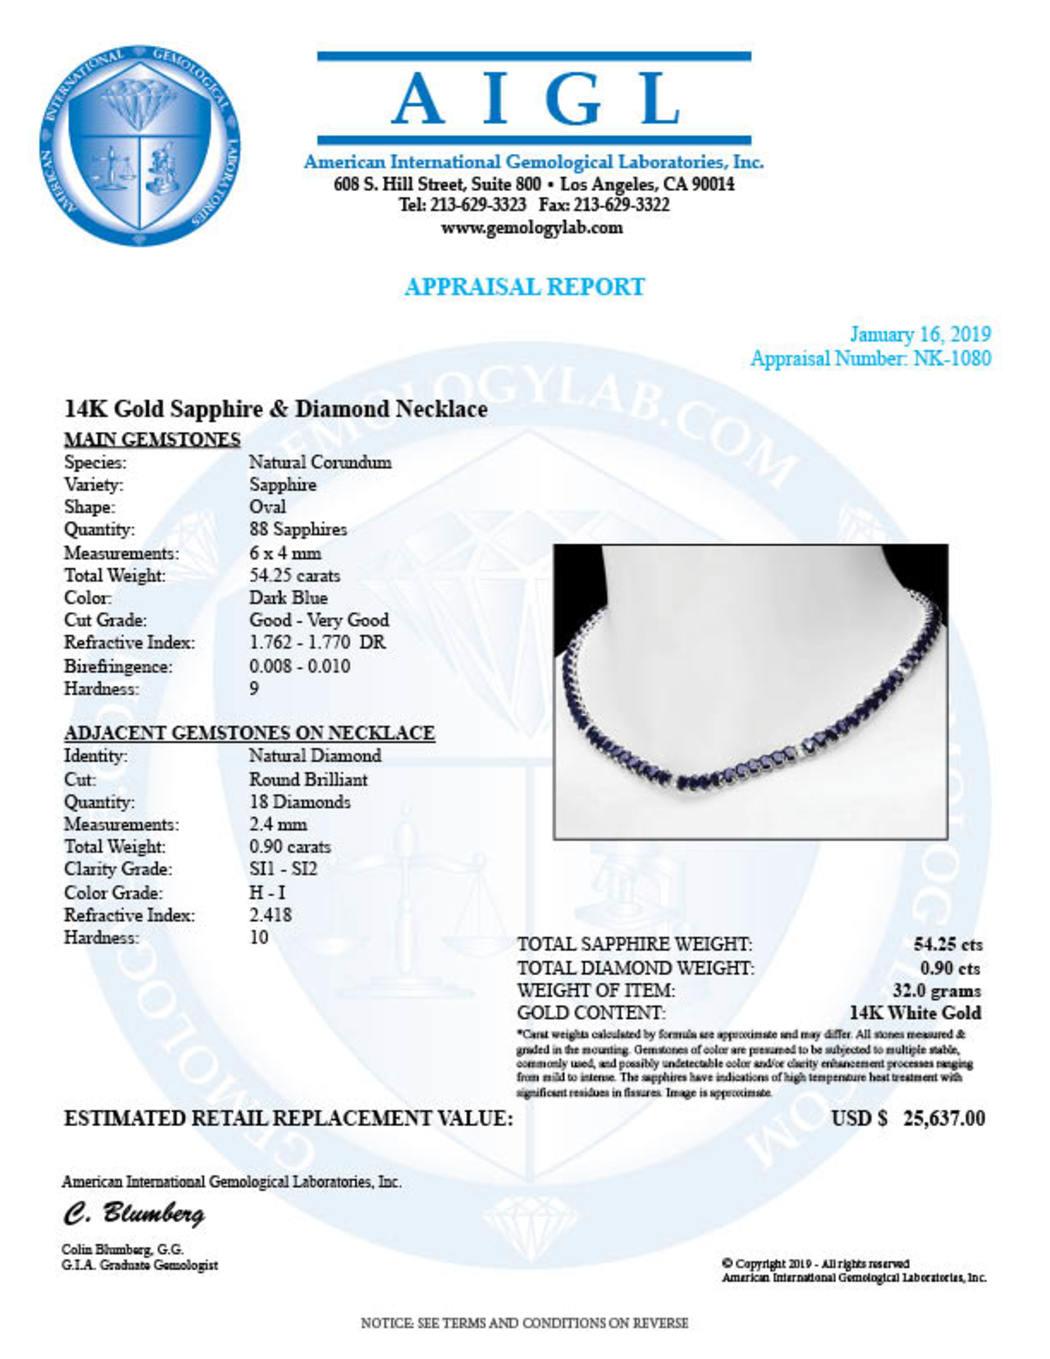 14K White Gold 54.25ct Sapphire and 0.90ct Diamond Necklace